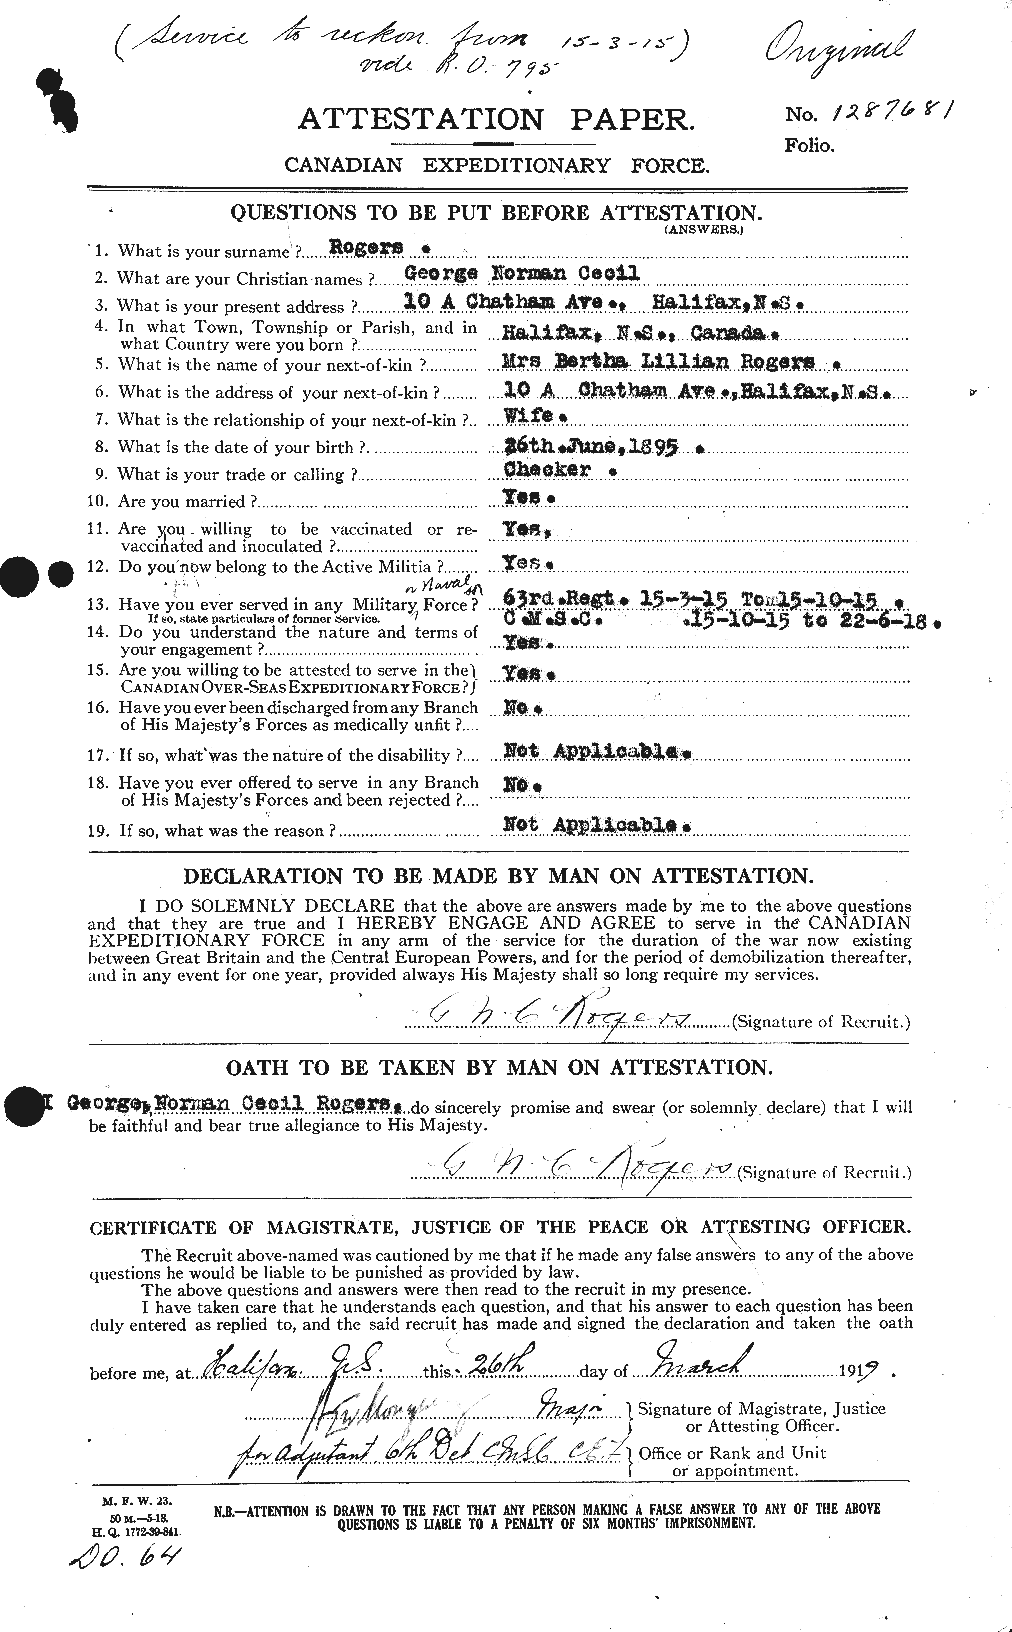 Personnel Records of the First World War - CEF 611097a